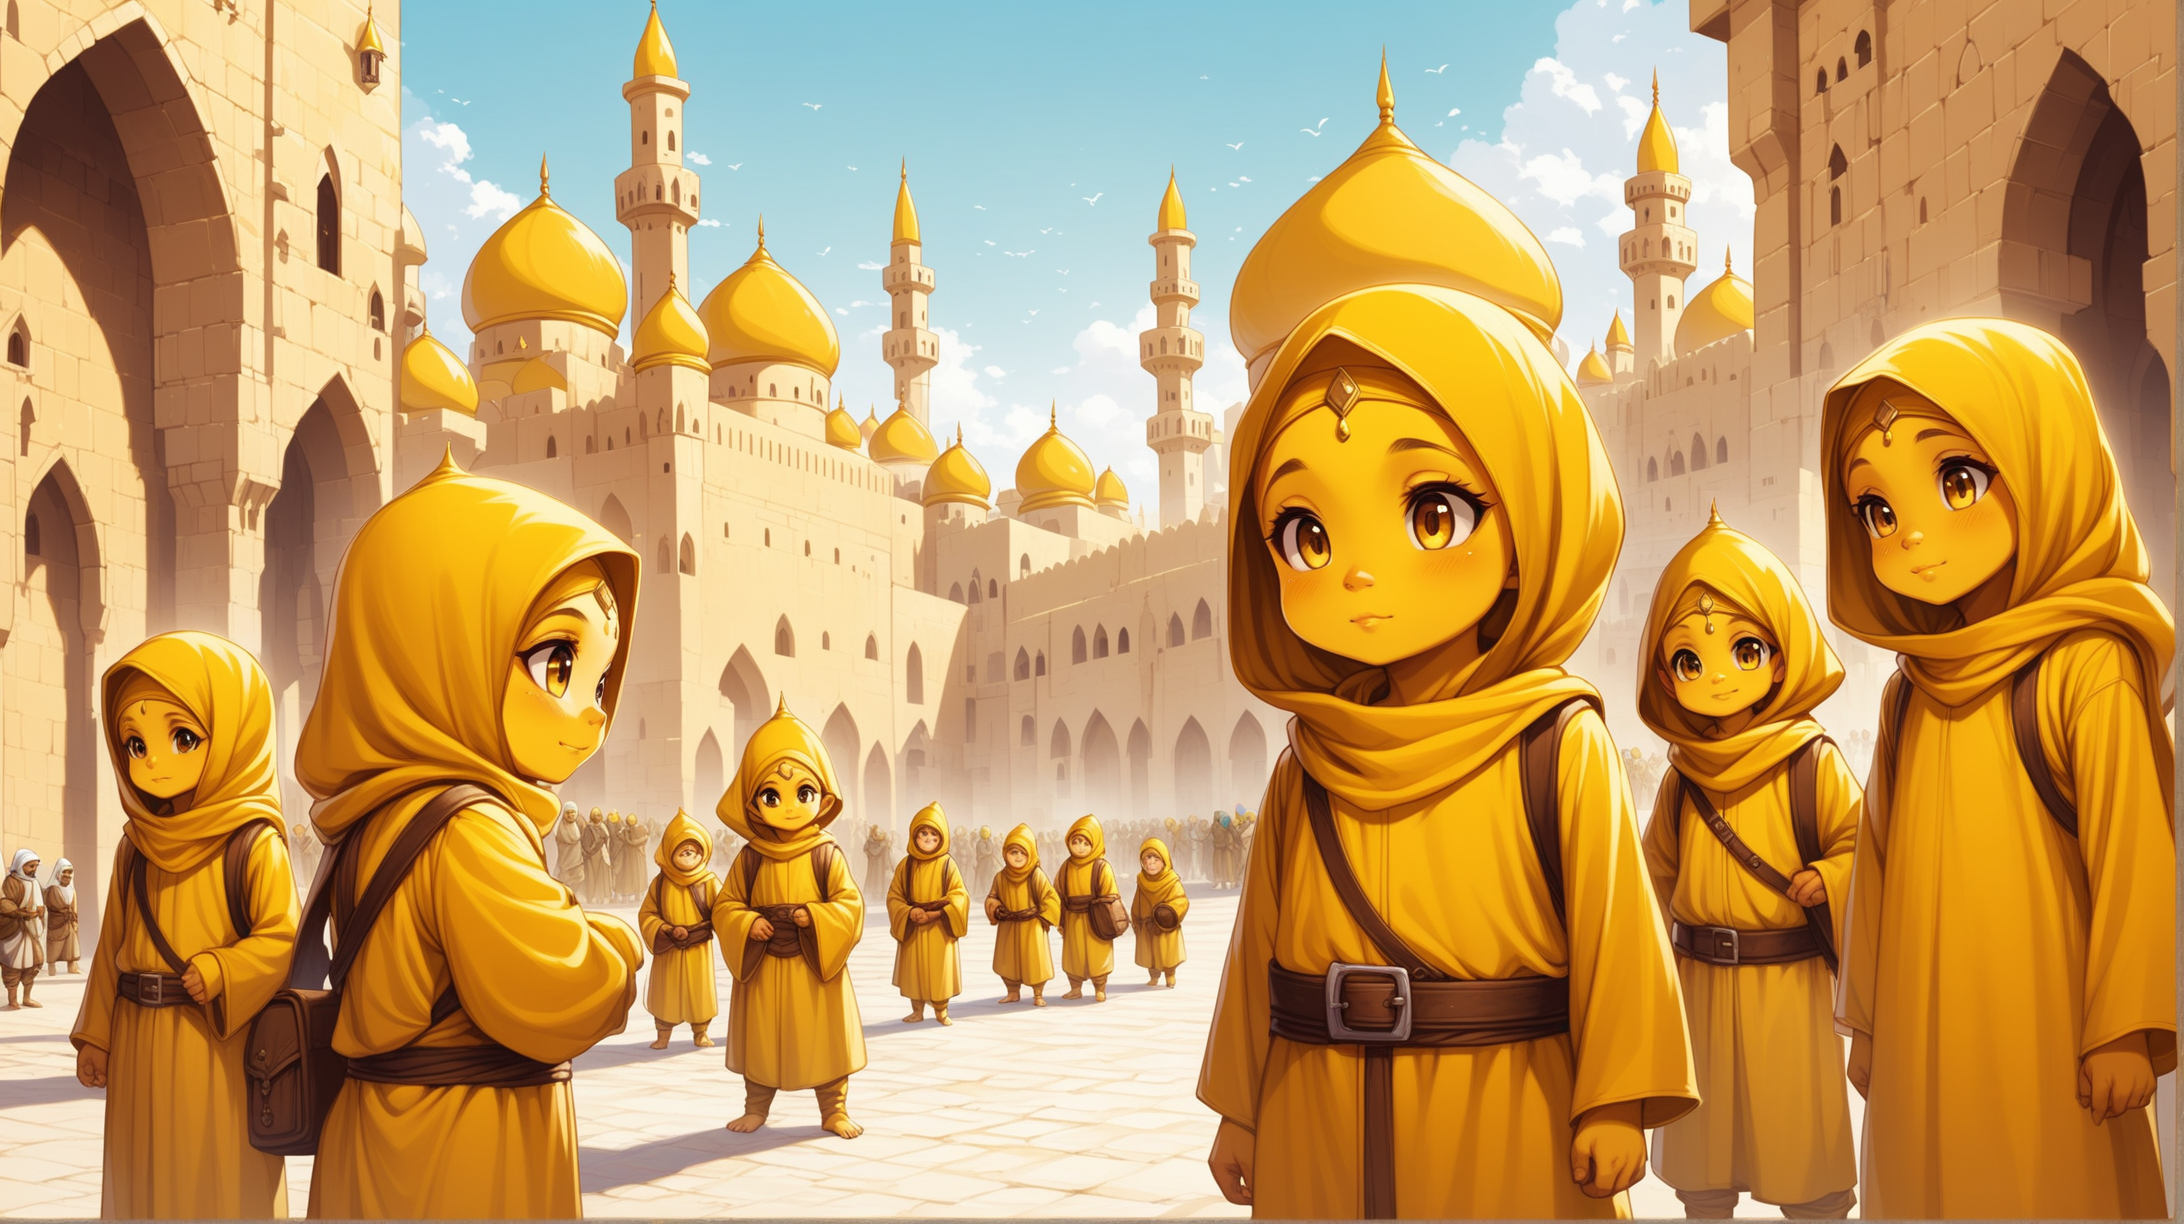 Medieval Fantasy Scene Young Gnome Boys and Girls in Arabic City